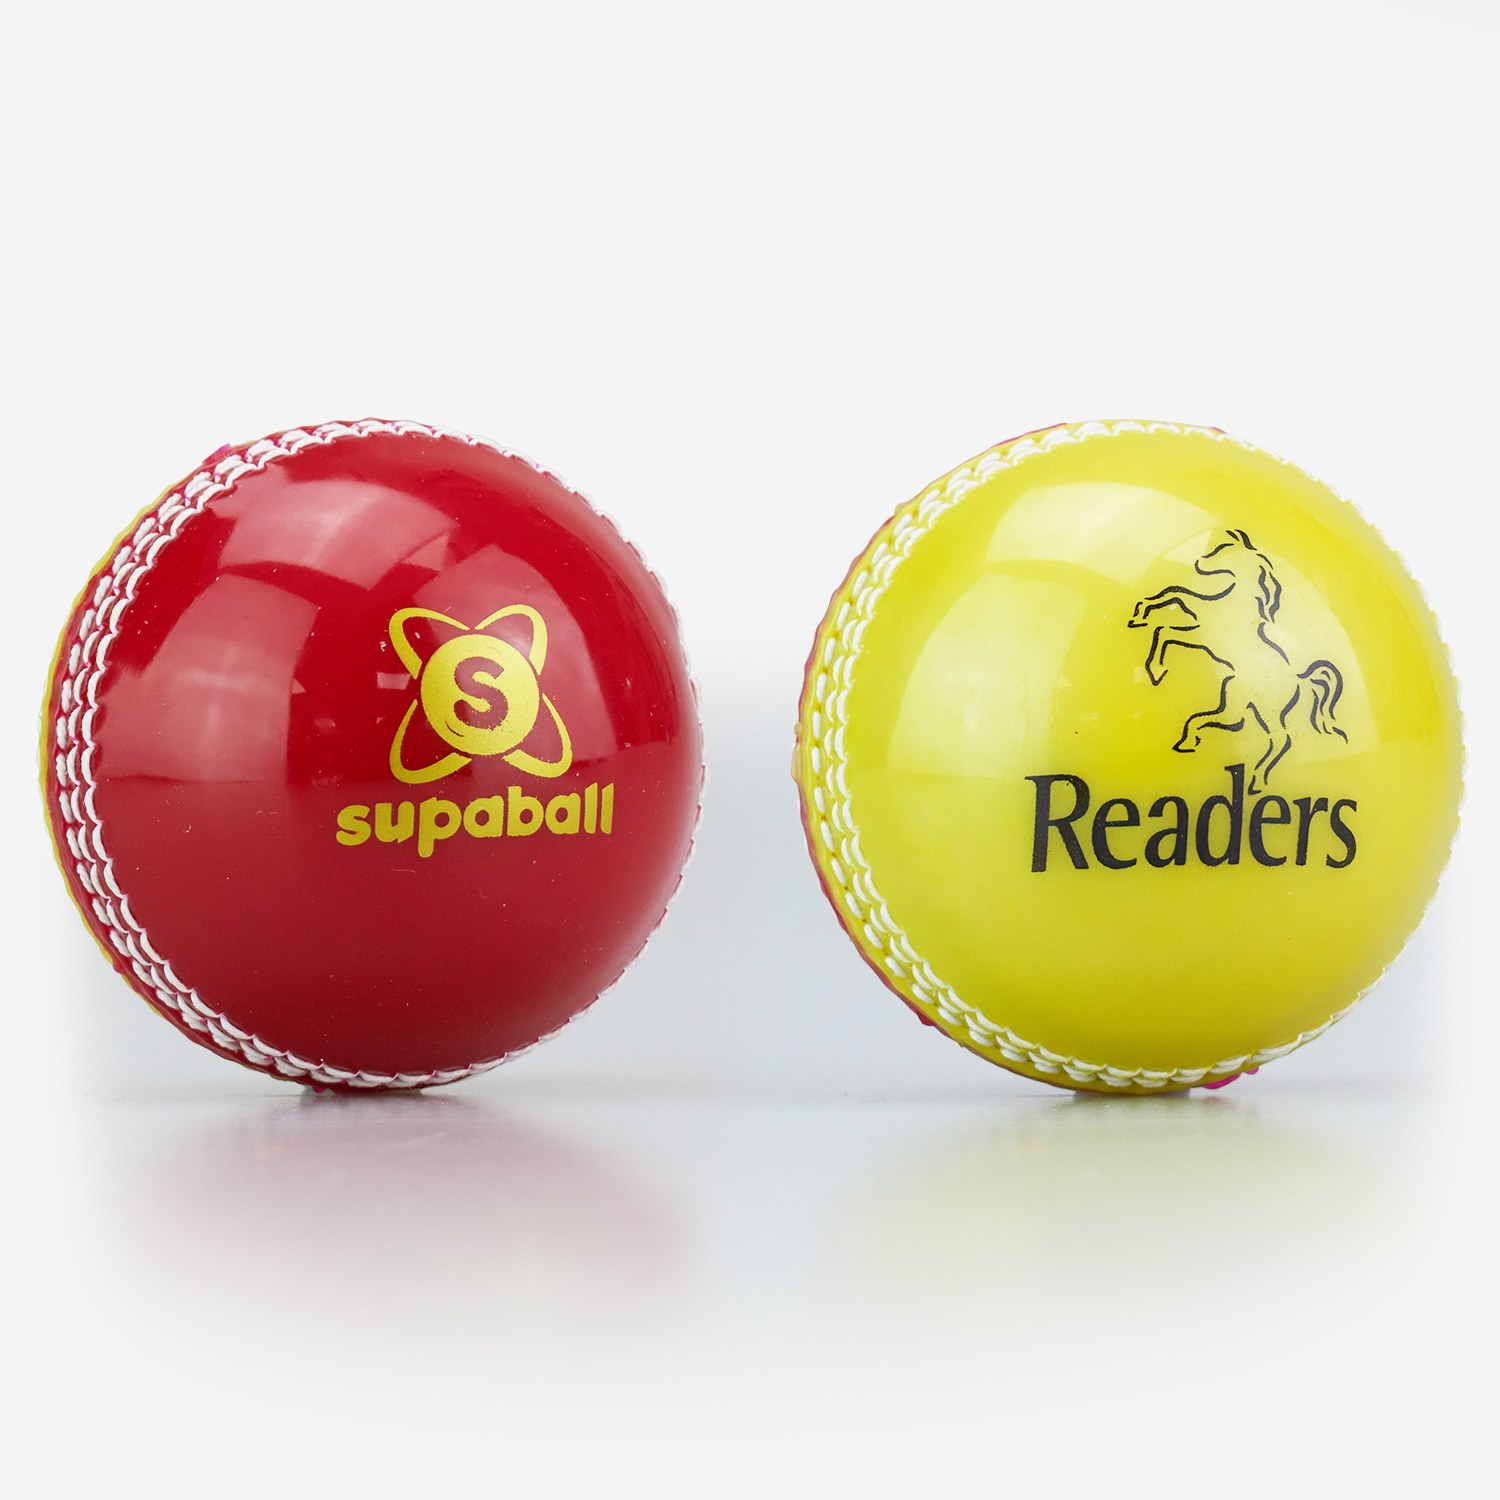 Readers Supaball Red & Yellow